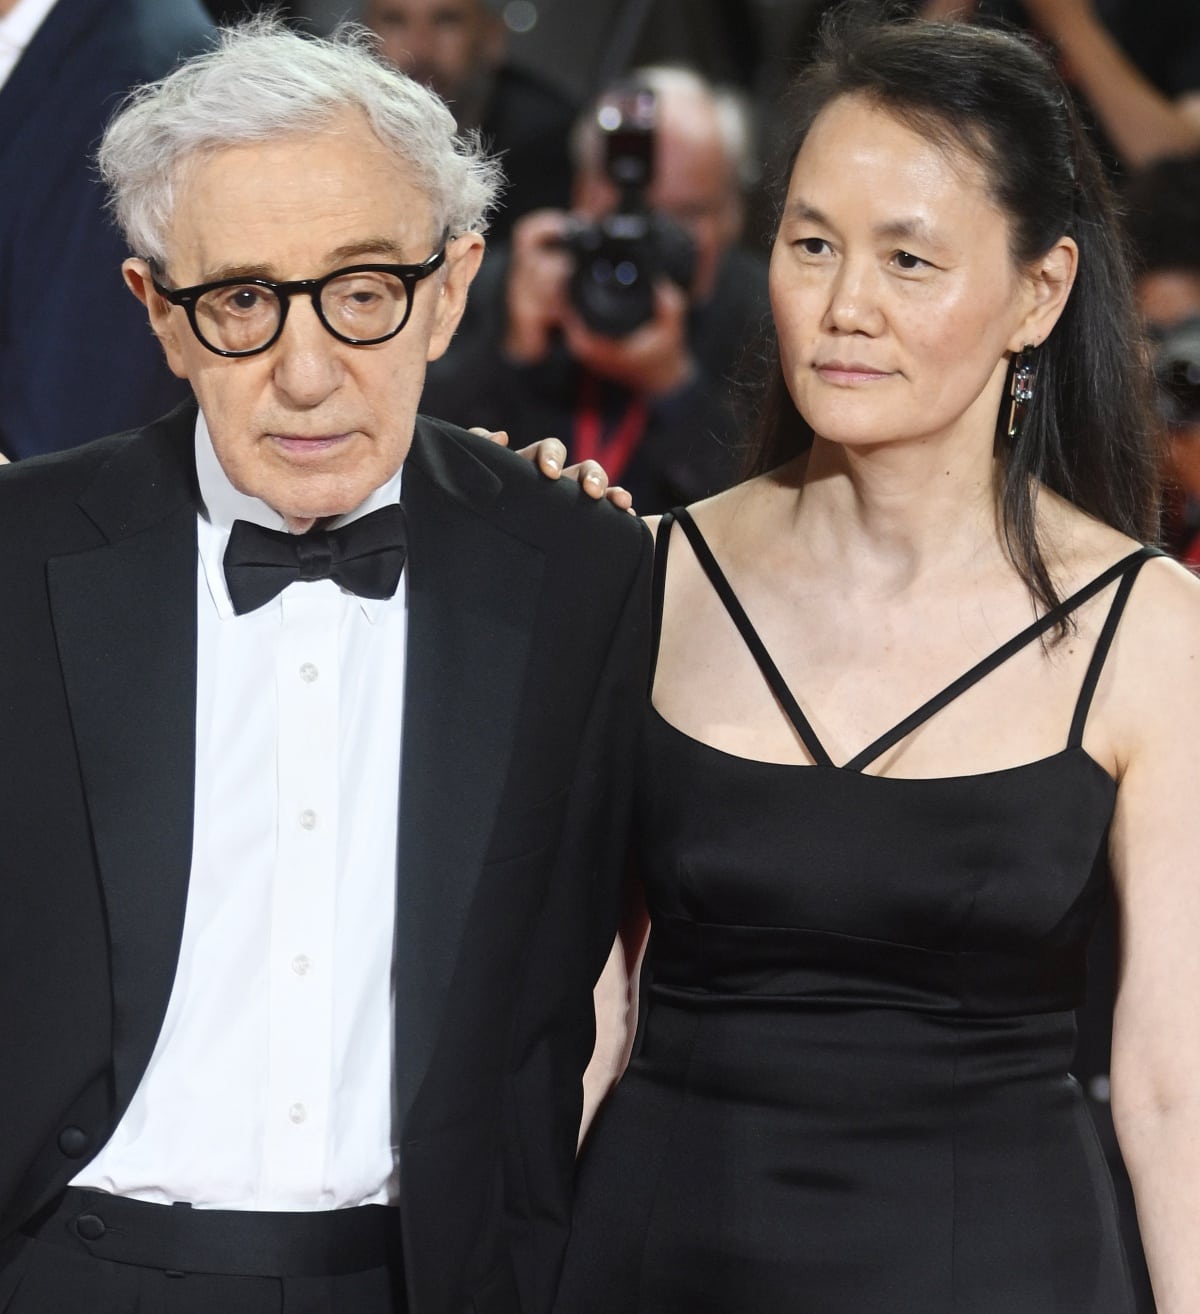 Woody Allen and Soon-Yi Previn have an unconventional love story that still raises eyebrows and stirs up controversies to this day